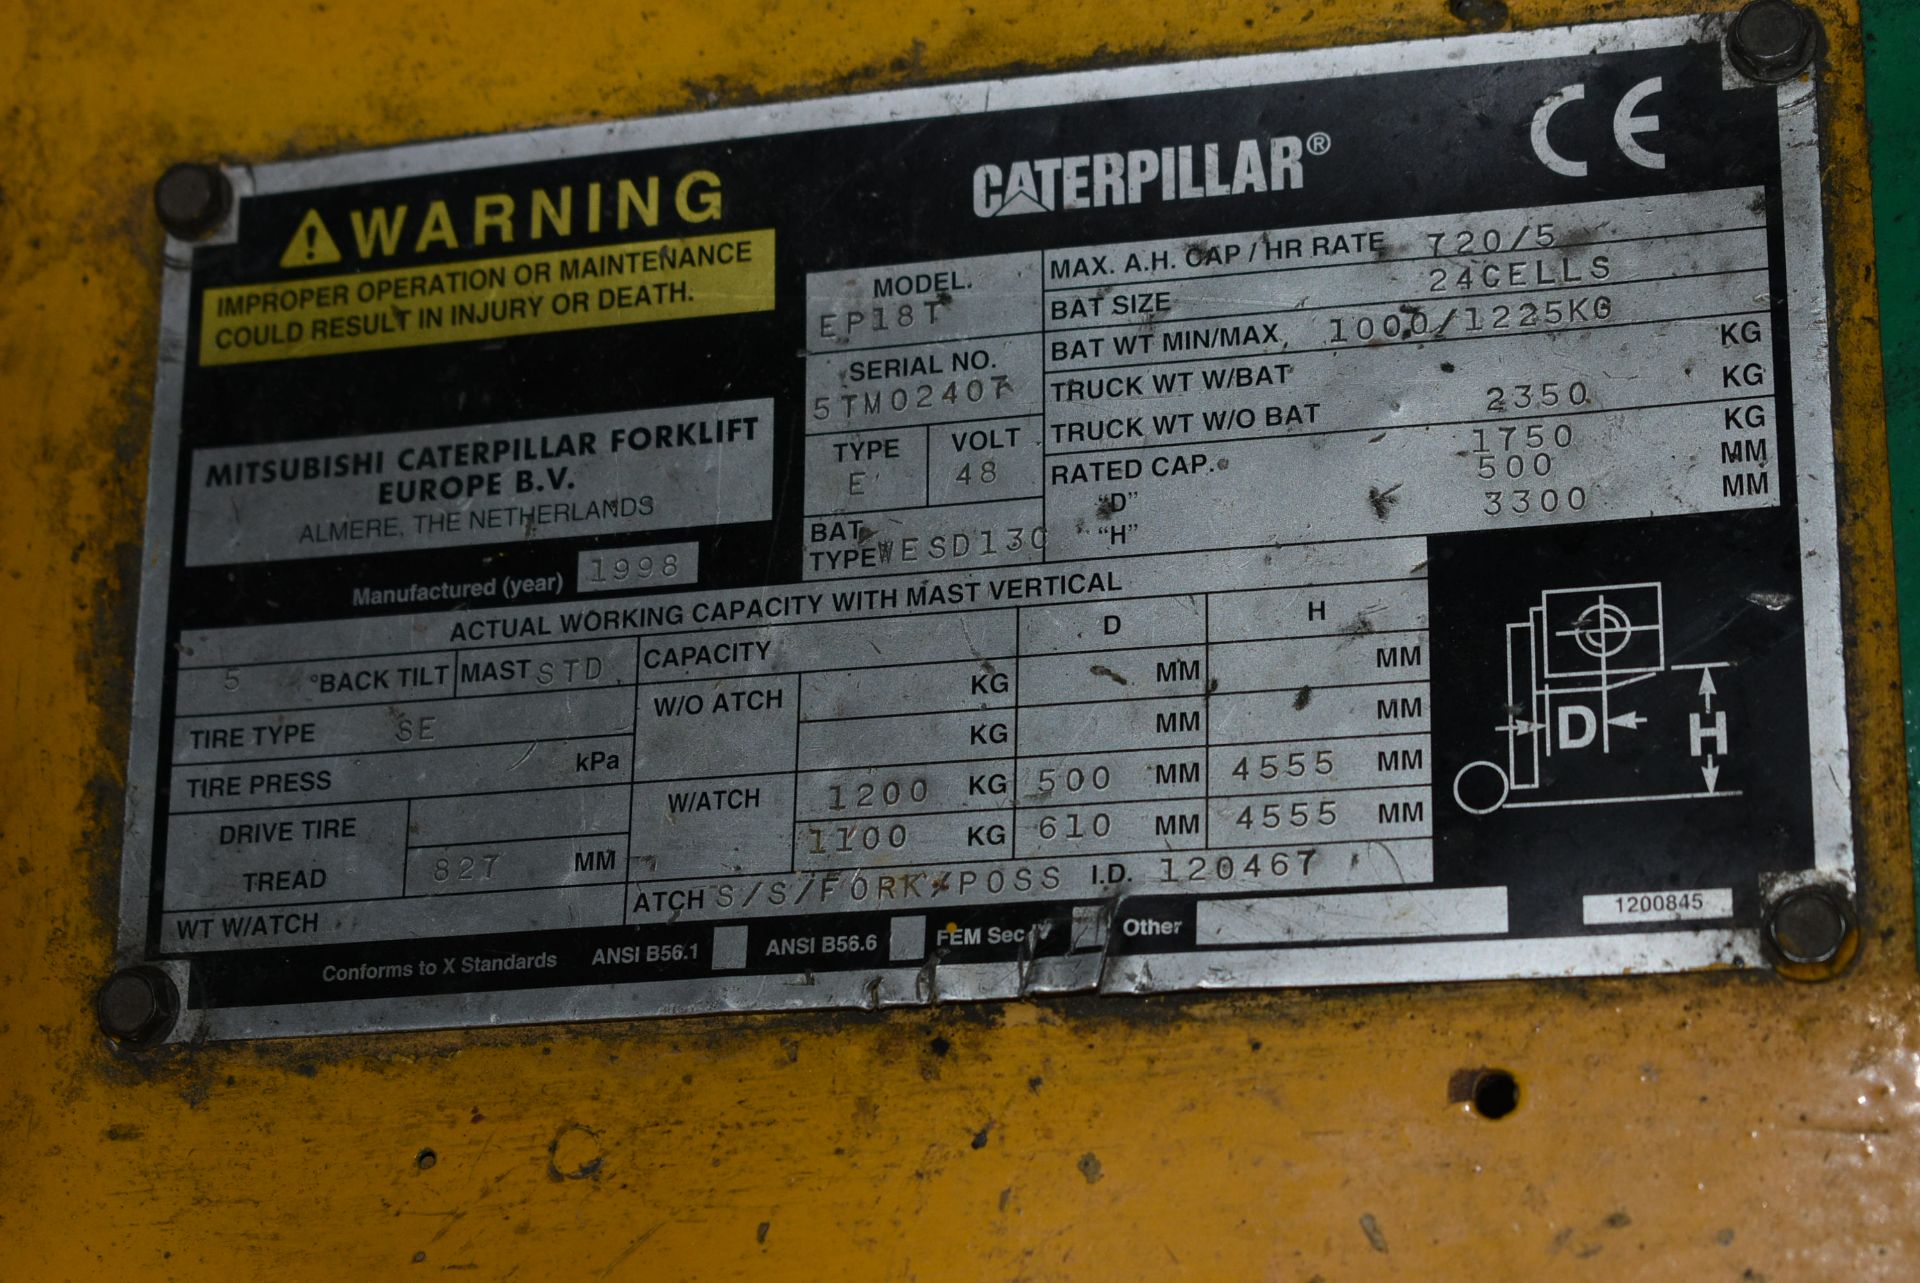 Caterpillar EP18T 1750kg capacity BATTERY ELECTRIC THREE WHEEL FORK LIFT TRUCK, serial no. 5TM02407, - Image 6 of 9